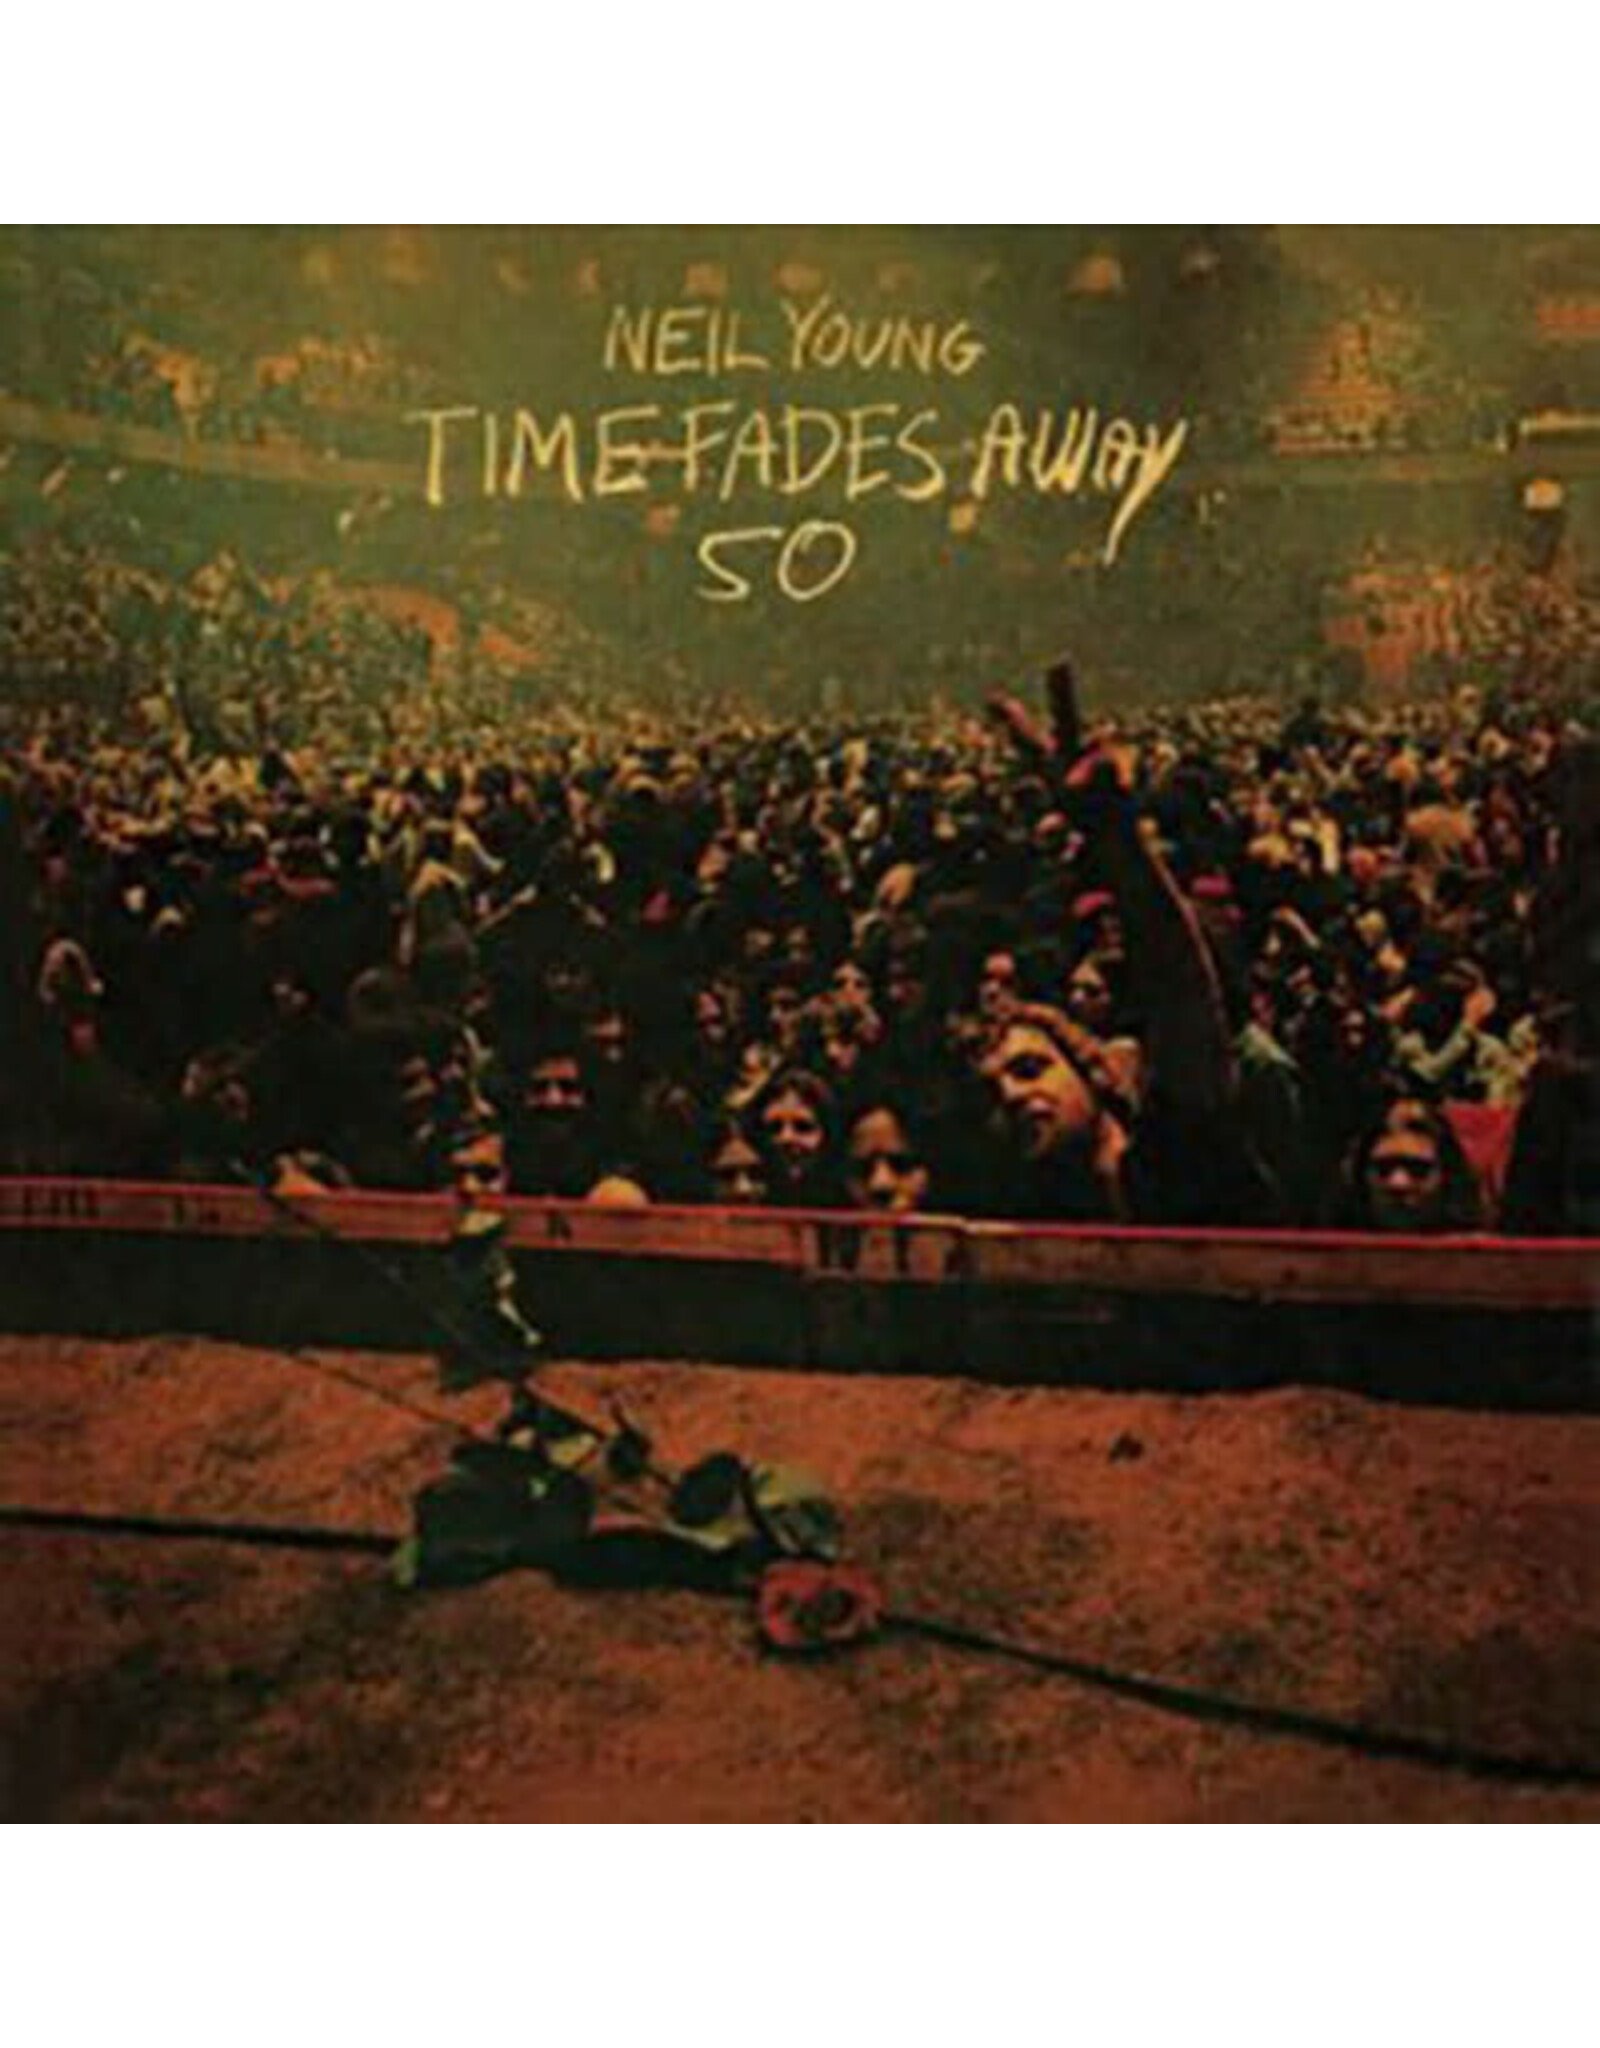 Reprise Young, Neil: Time Fades Away (50th Anniversary Edition) [Clear Vinyl] LP